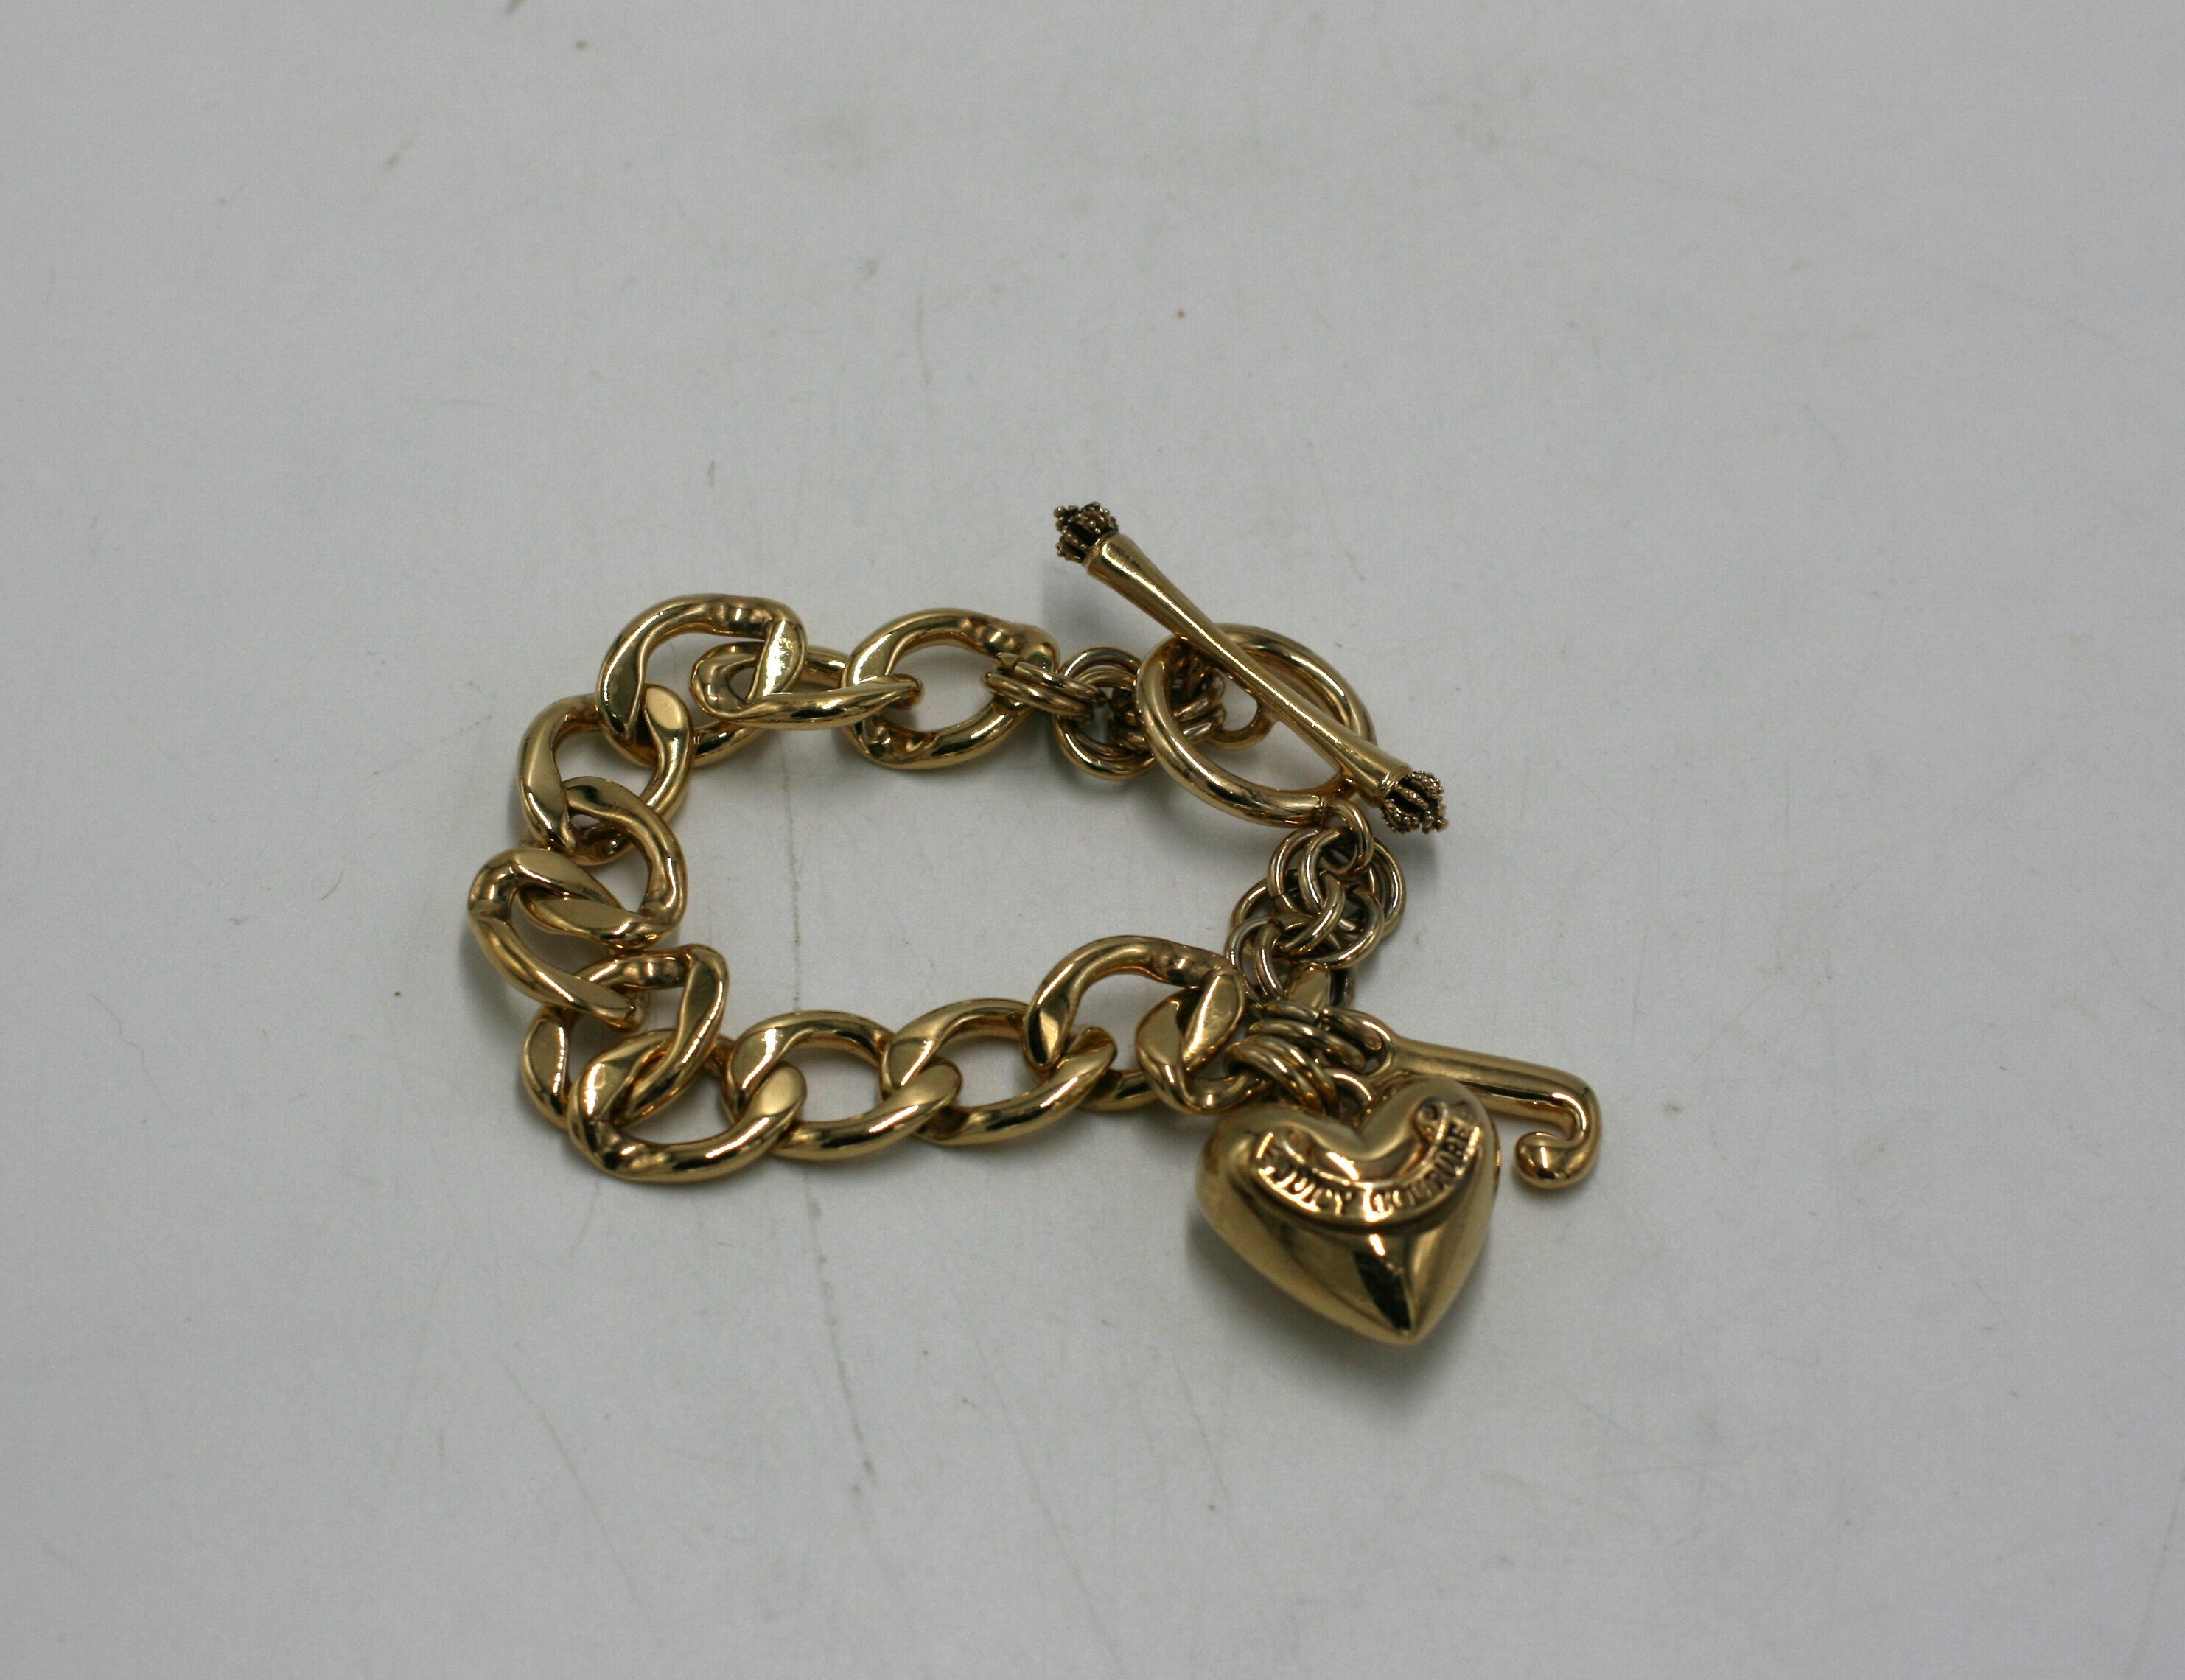 Juicy Couture gold puffed heart charm toggle bracelet - $44 - From Valerie